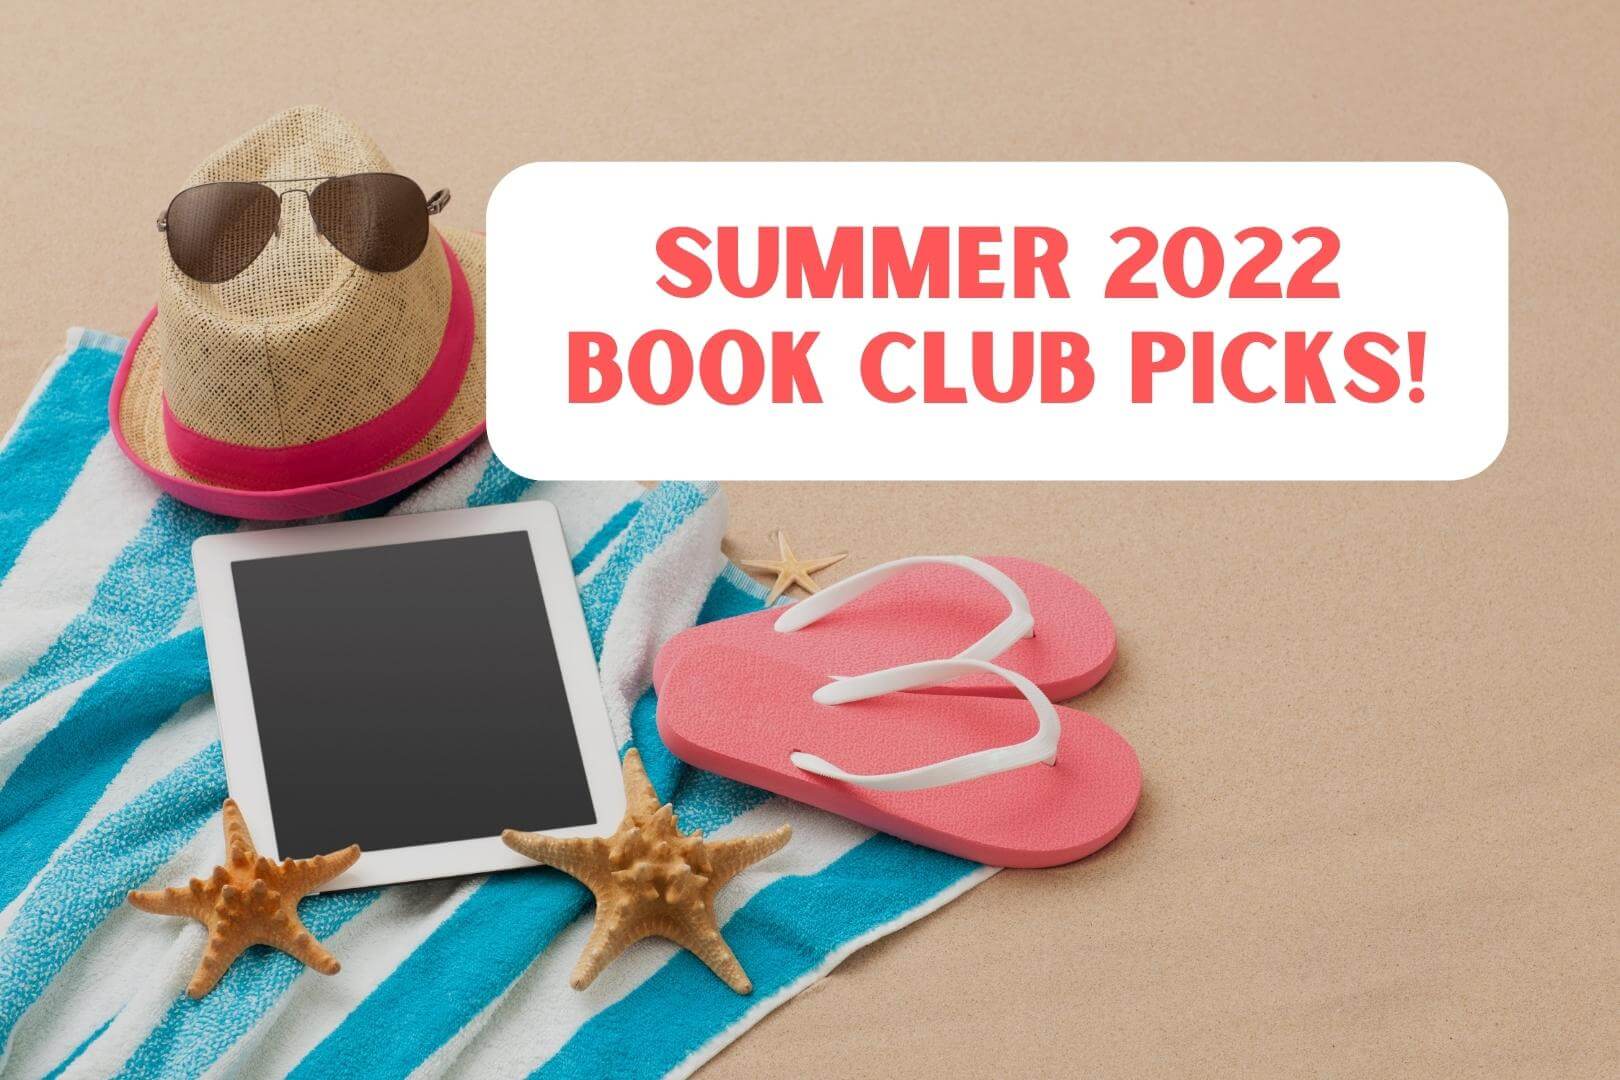 10 Books for Your Book Club in Summer 2022